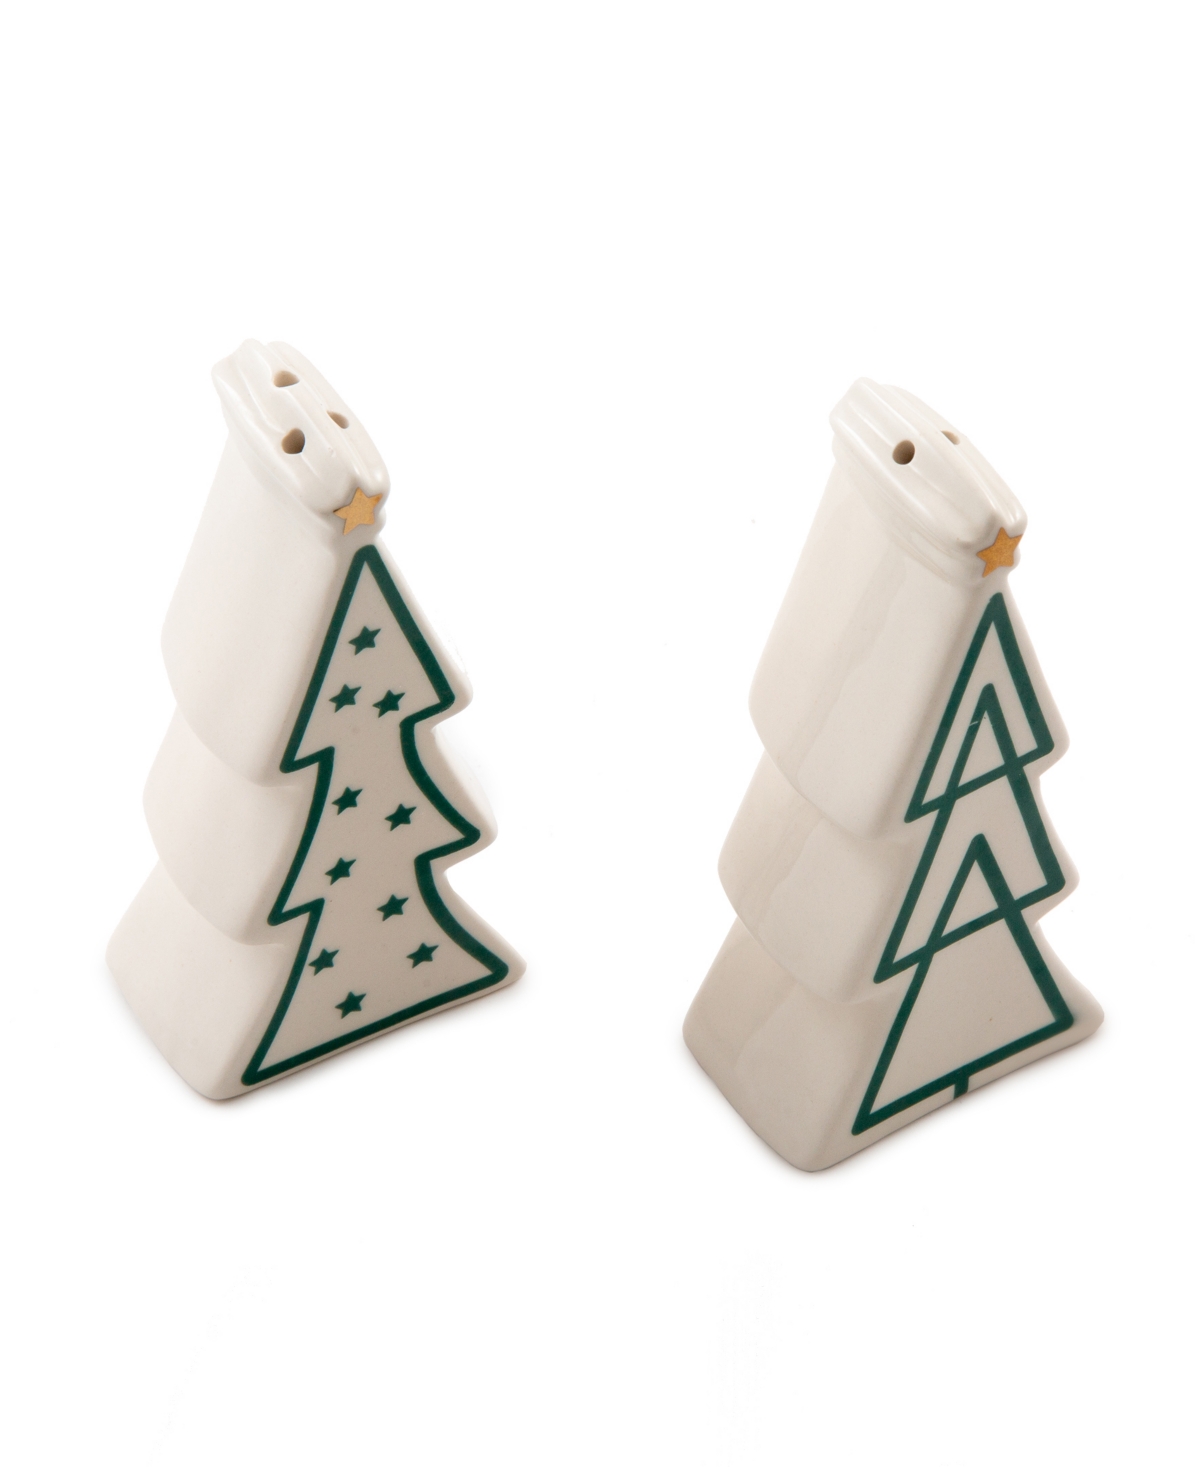 Thirstystone Christmas Tree Salt And Pepper Shakers, Set Of 2 In White,green